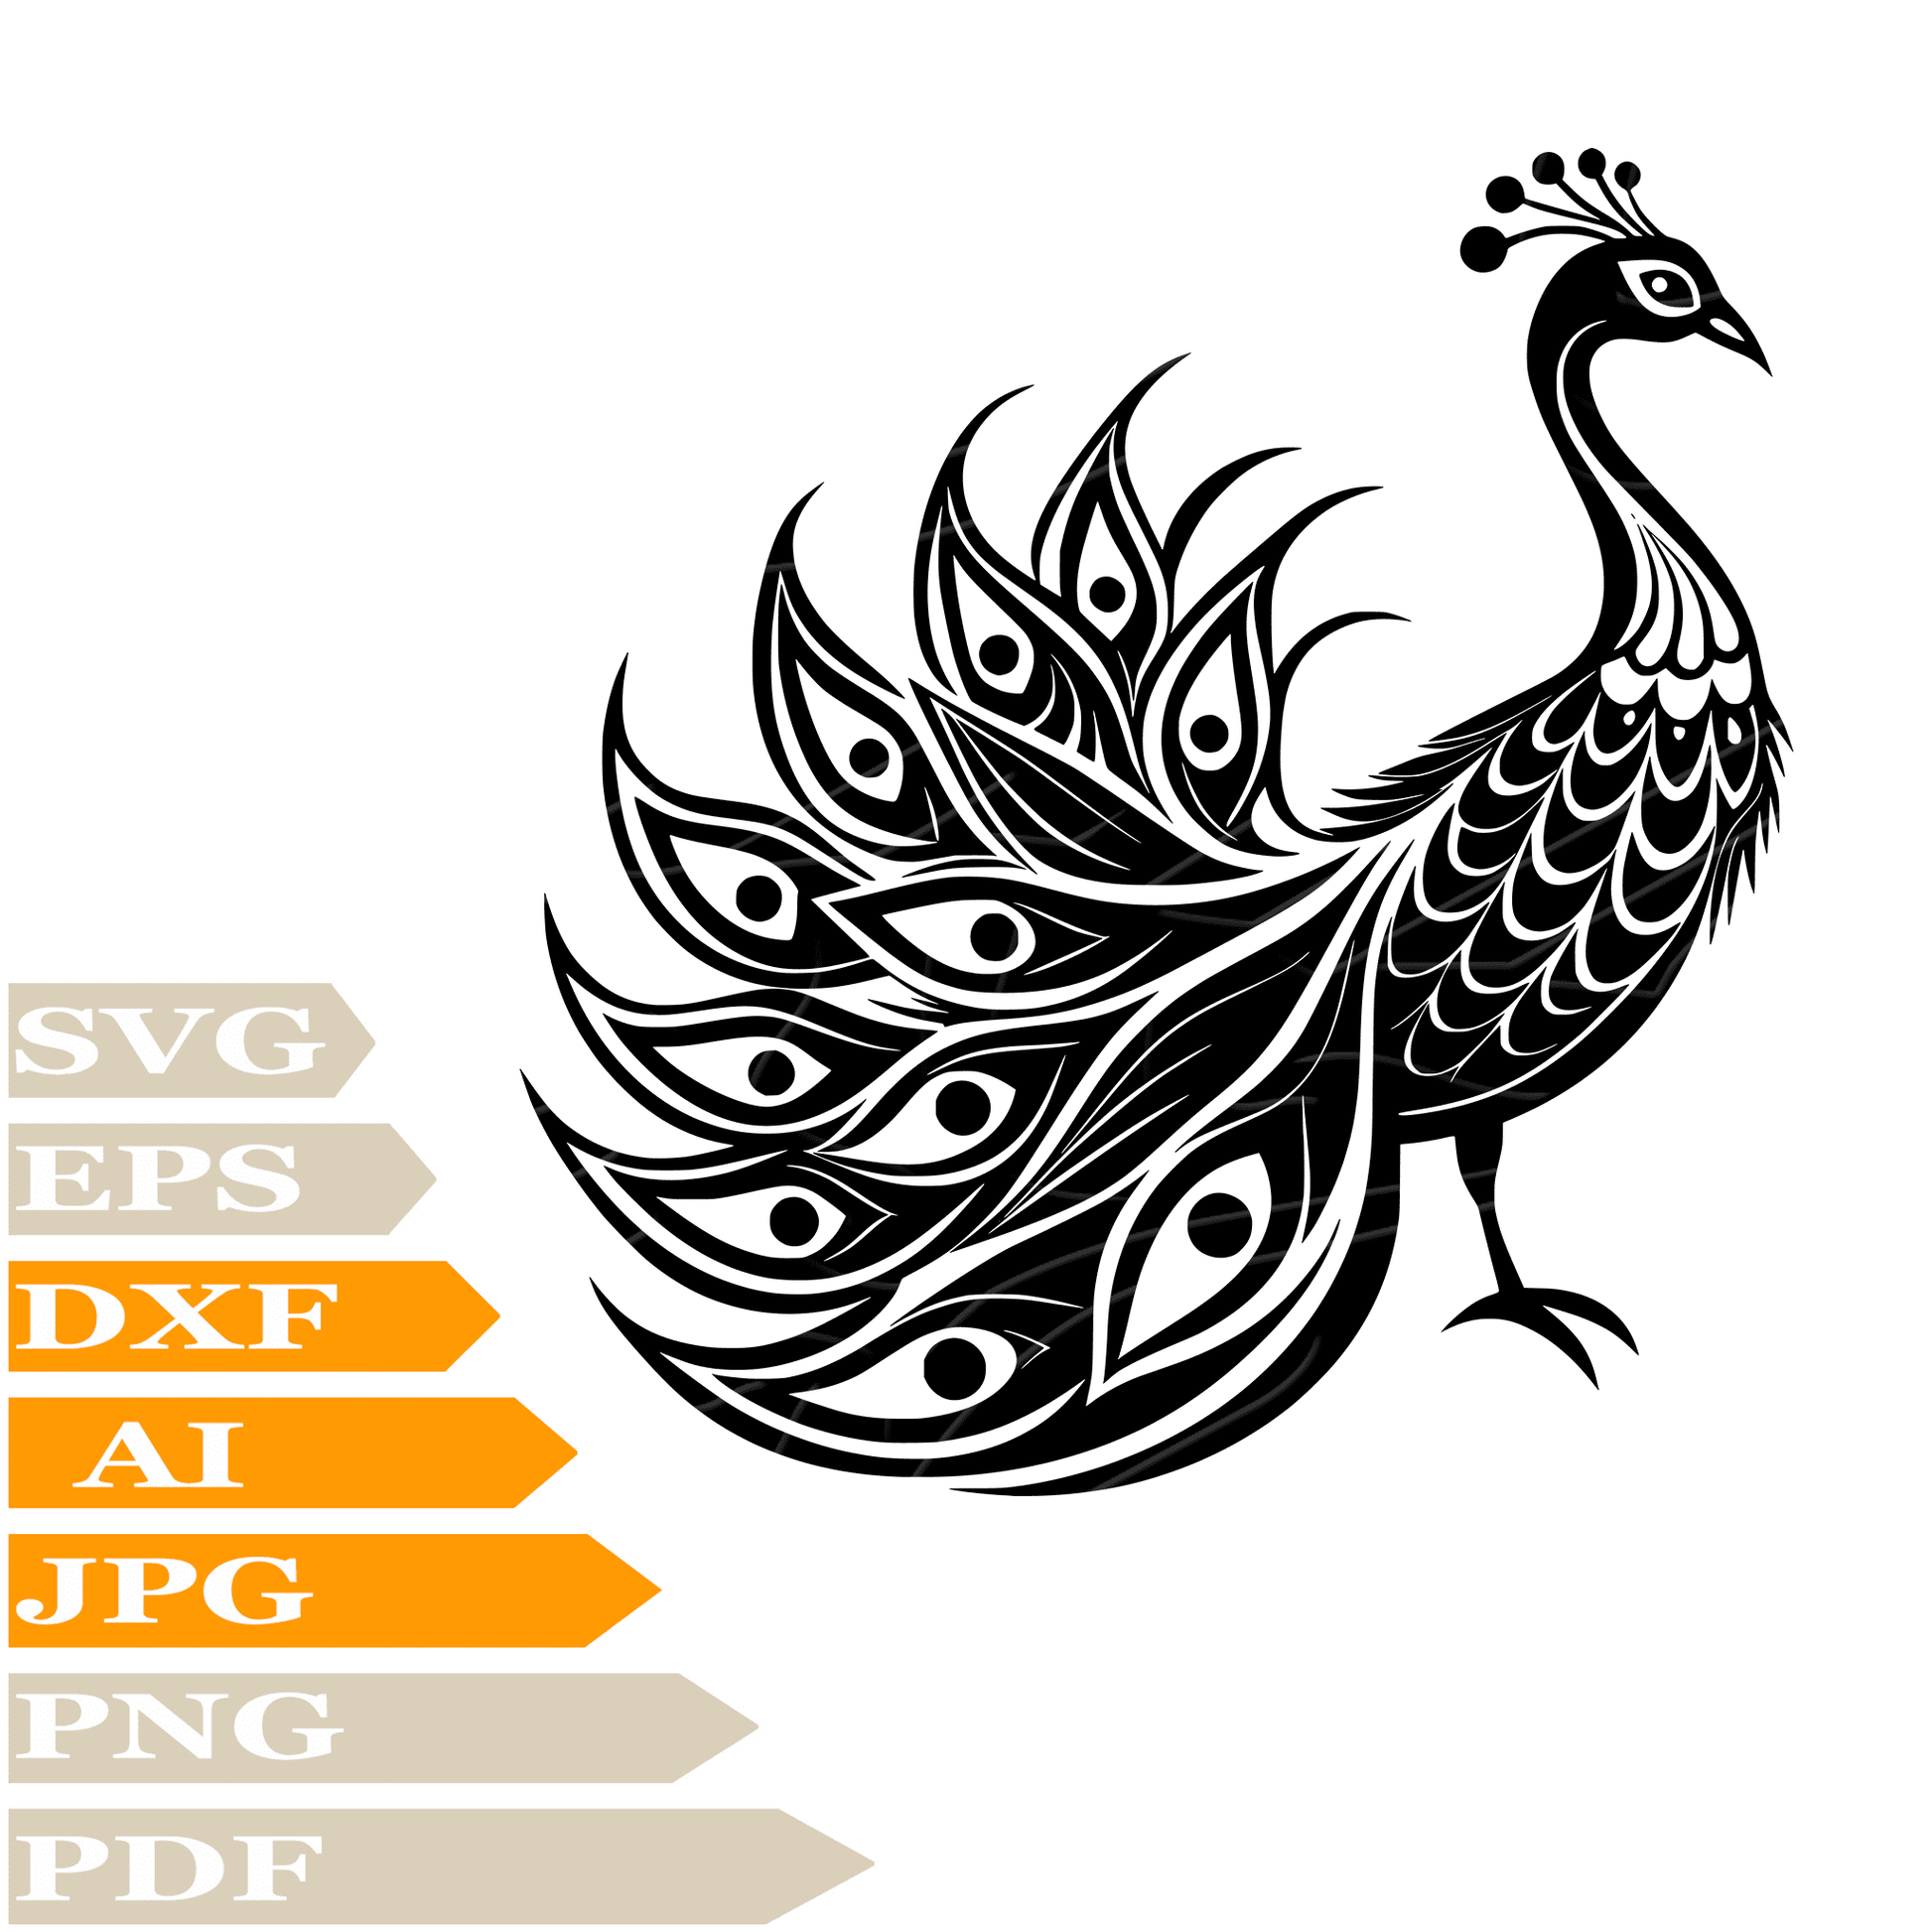 Peacock SVG, Feather SVG Design, Bird Peacock Vector, Peacock PNG, Peacock For Cricut, Peacock Cut File, Peacock For Tattoo Image Cut, Clipart, Print, Decal, Shirt